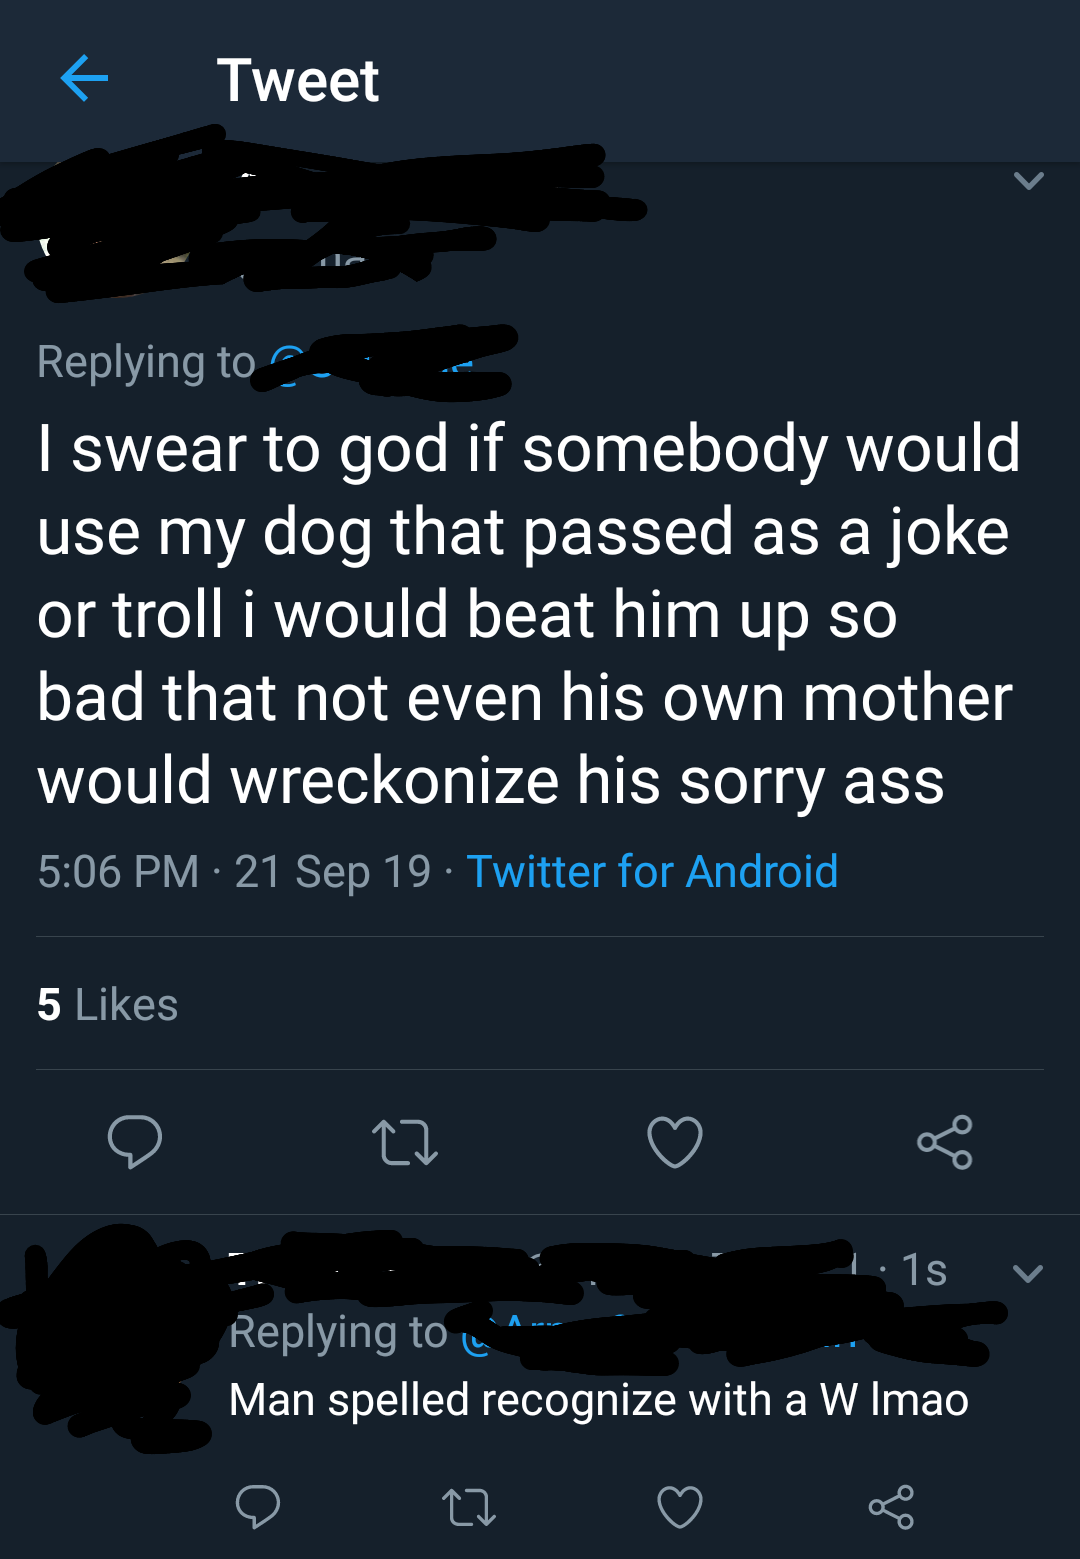 citizenship quotes - Tweet m e I swear to god if somebody would use my dog that passed as a joke or troll i would beat him up so bad that not even his own mother would wreckonize his sorry ass 21 Sep 19 Twitter for Android 5 v 1.1s u Man spelled recognize